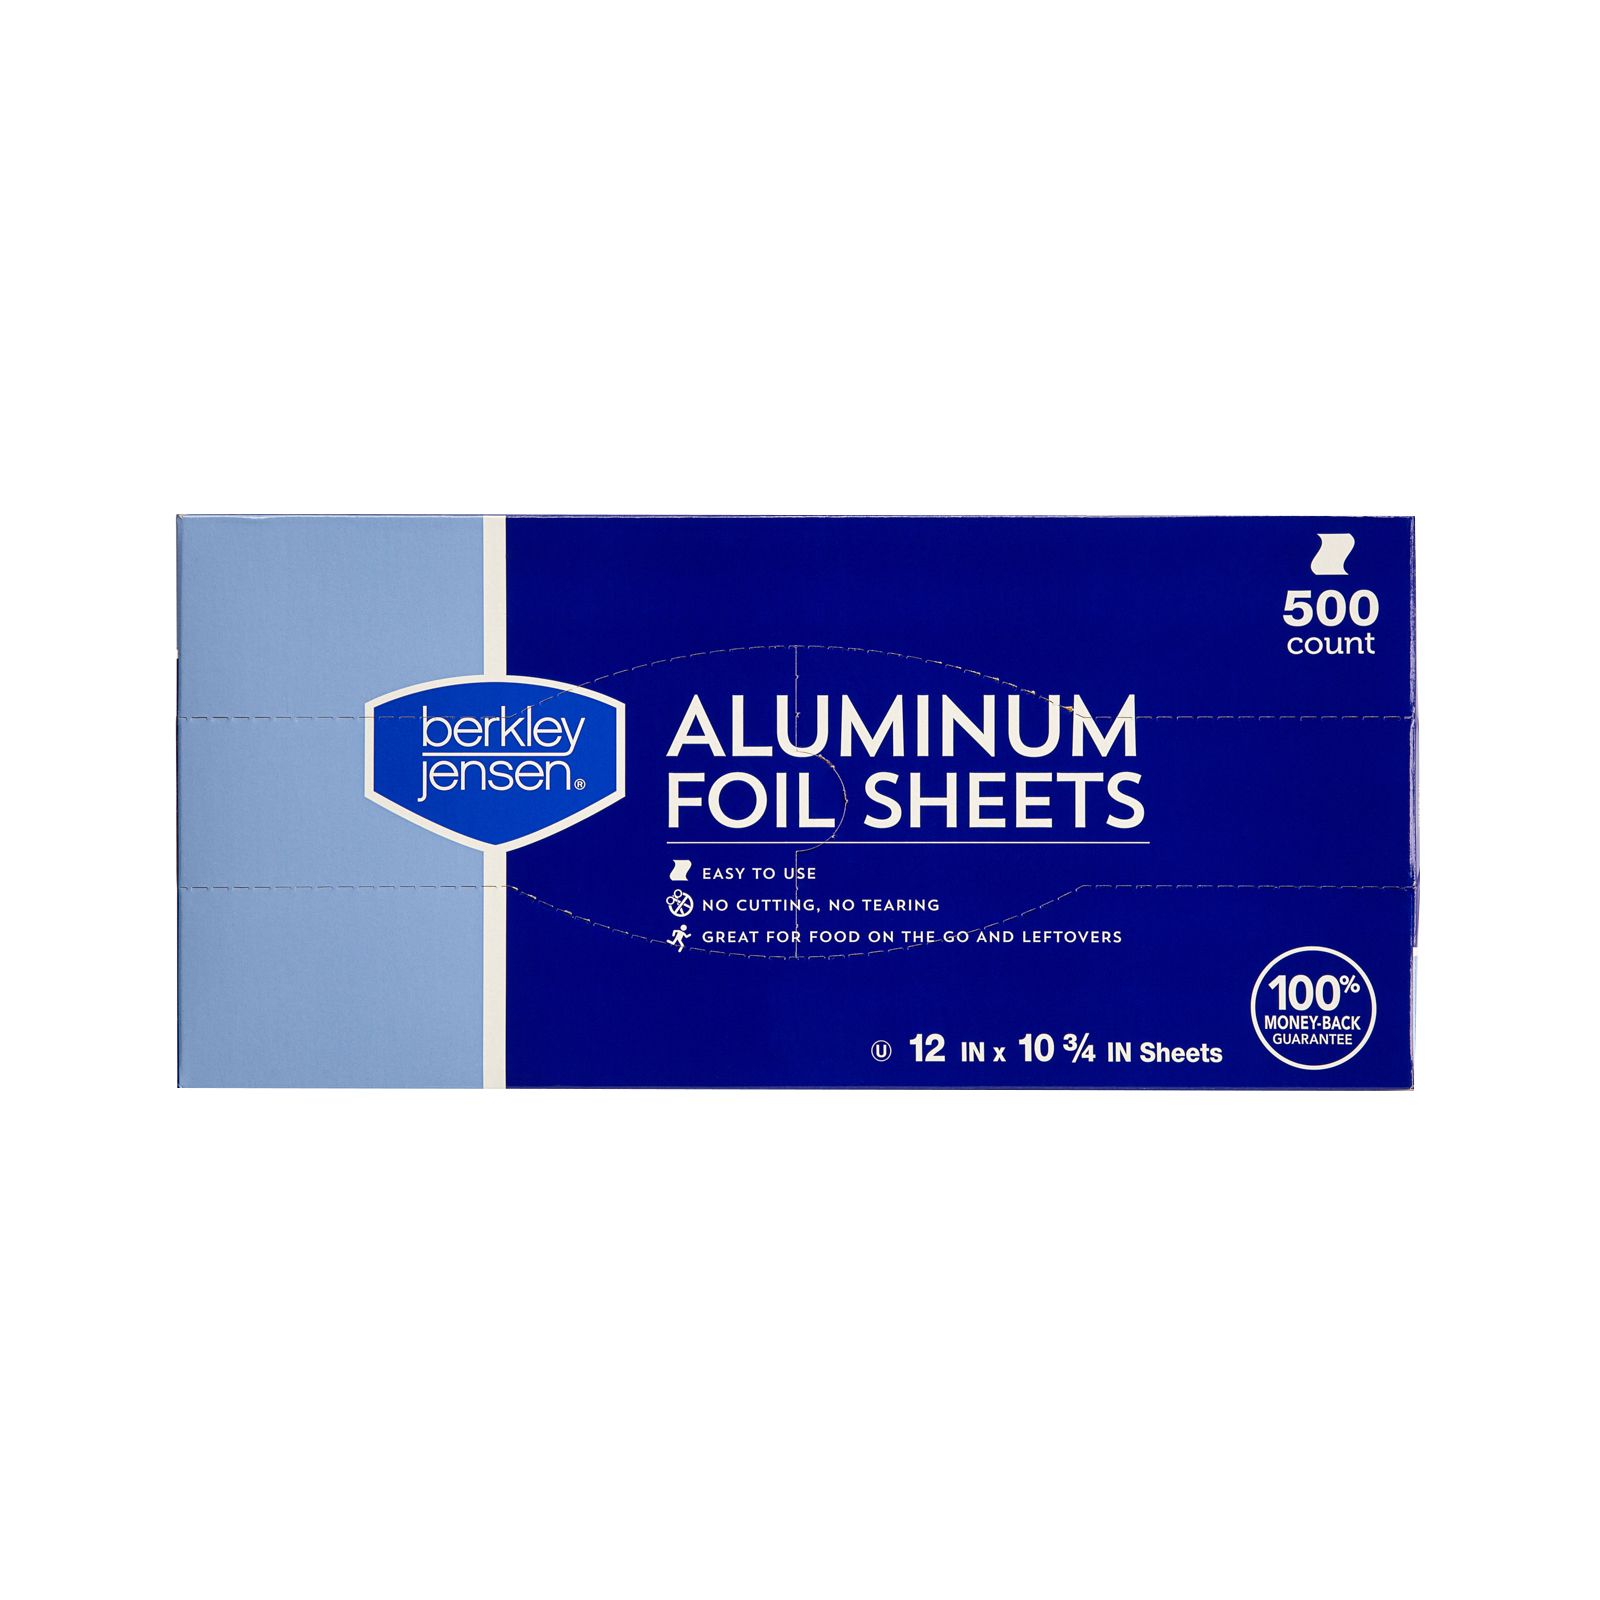 Whyaluminum Foil Has A Dull Side And A Shiny Side Reynolds Aluminum Foil Wrap